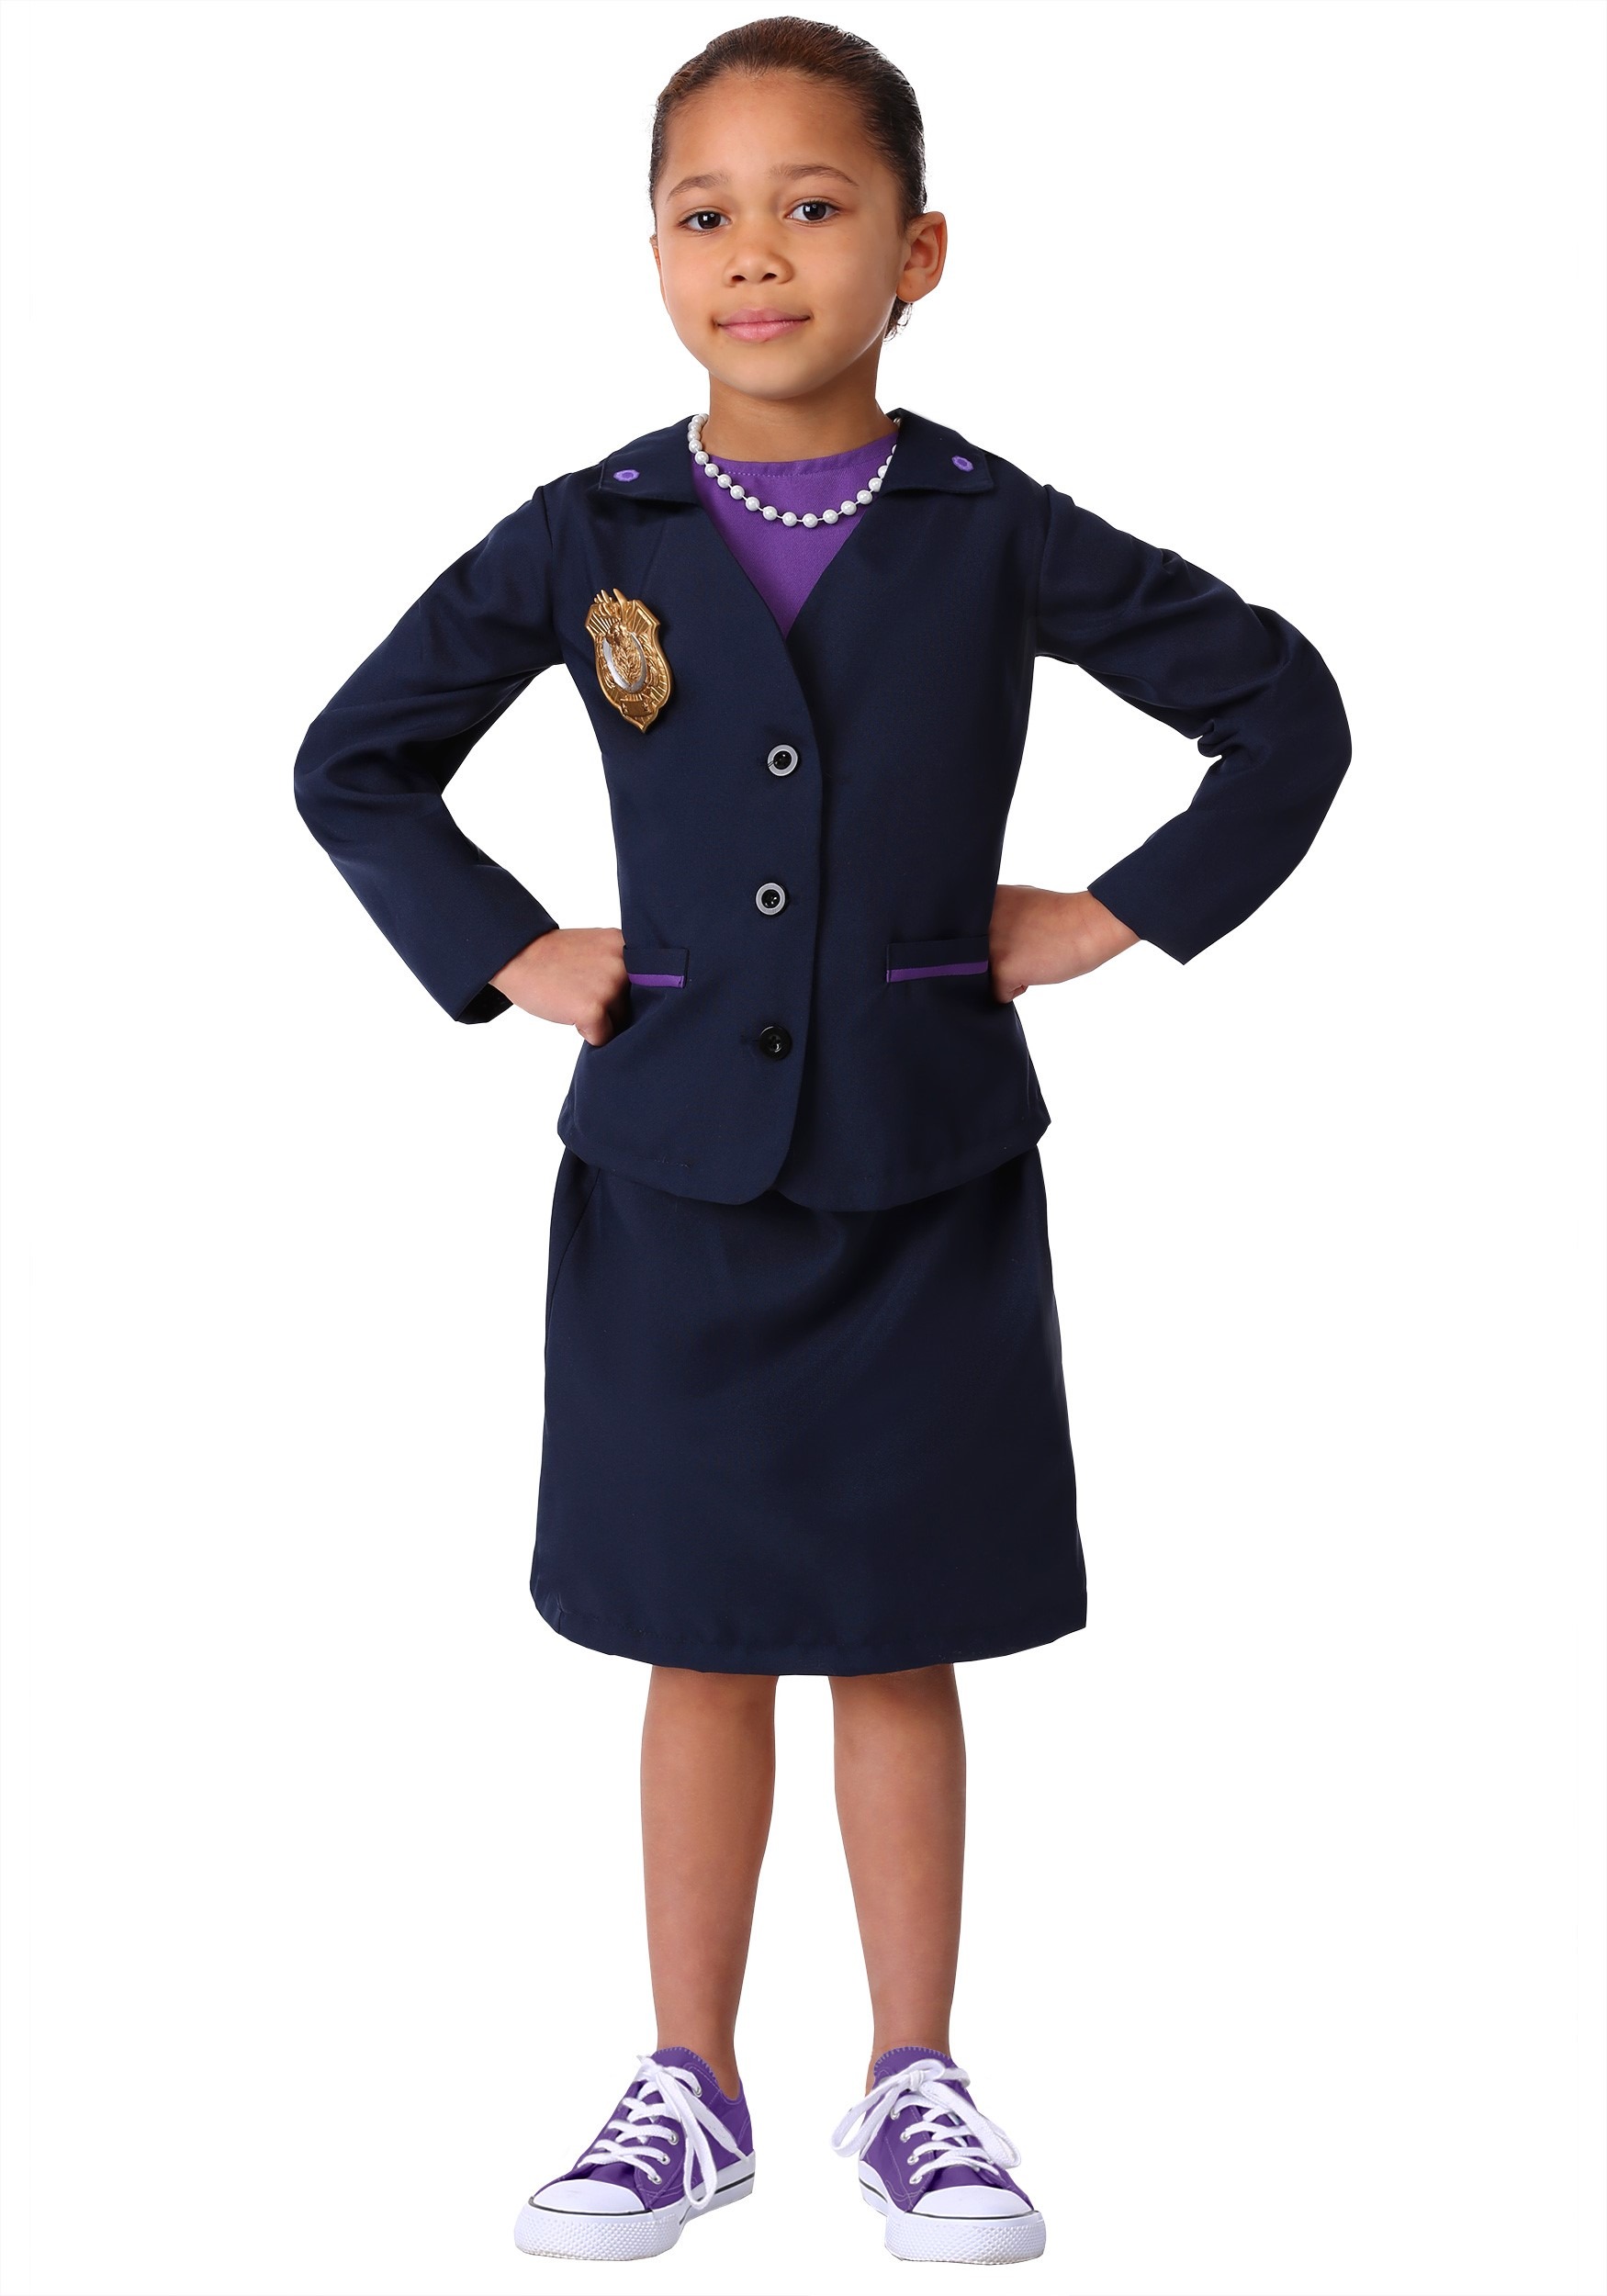 Photos - Fancy Dress NAVY FUN Costumes Odd Squad Ms. O  Suit Costume for Girls Purple/Blue F 